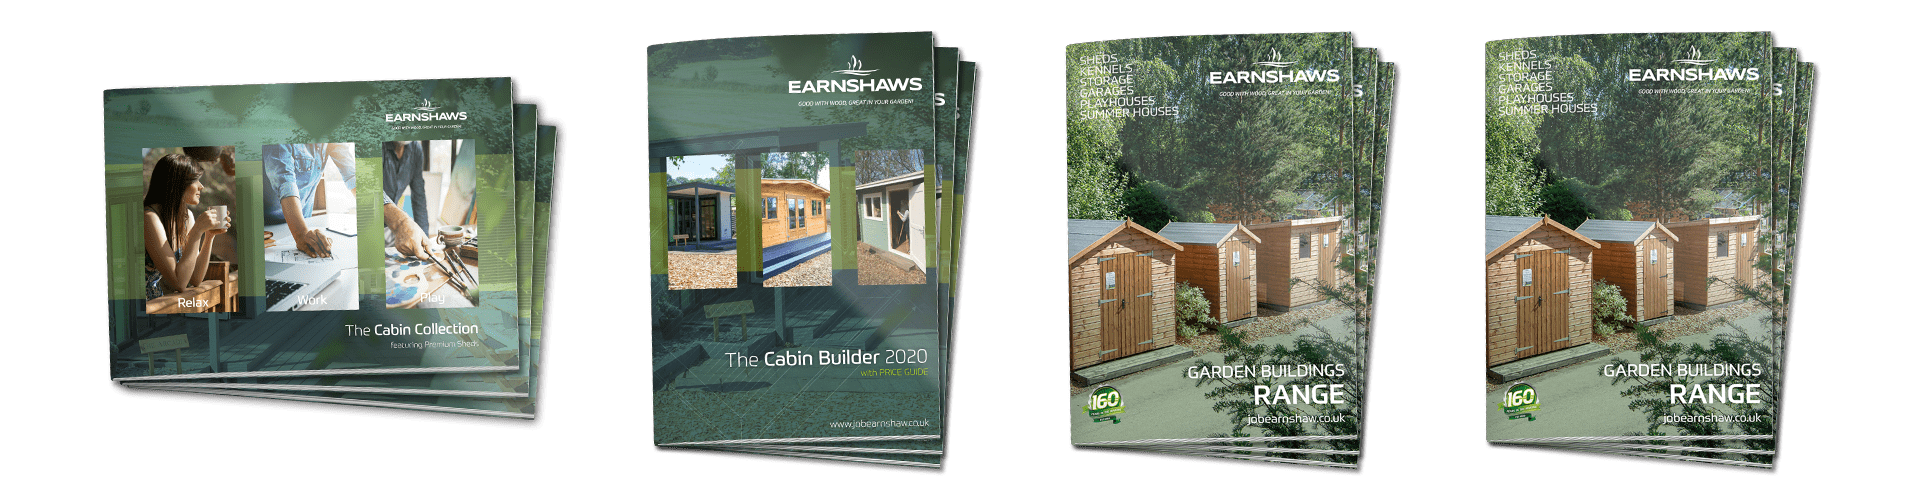 Earnshaws Fencing Centres - Sheds and Cabins